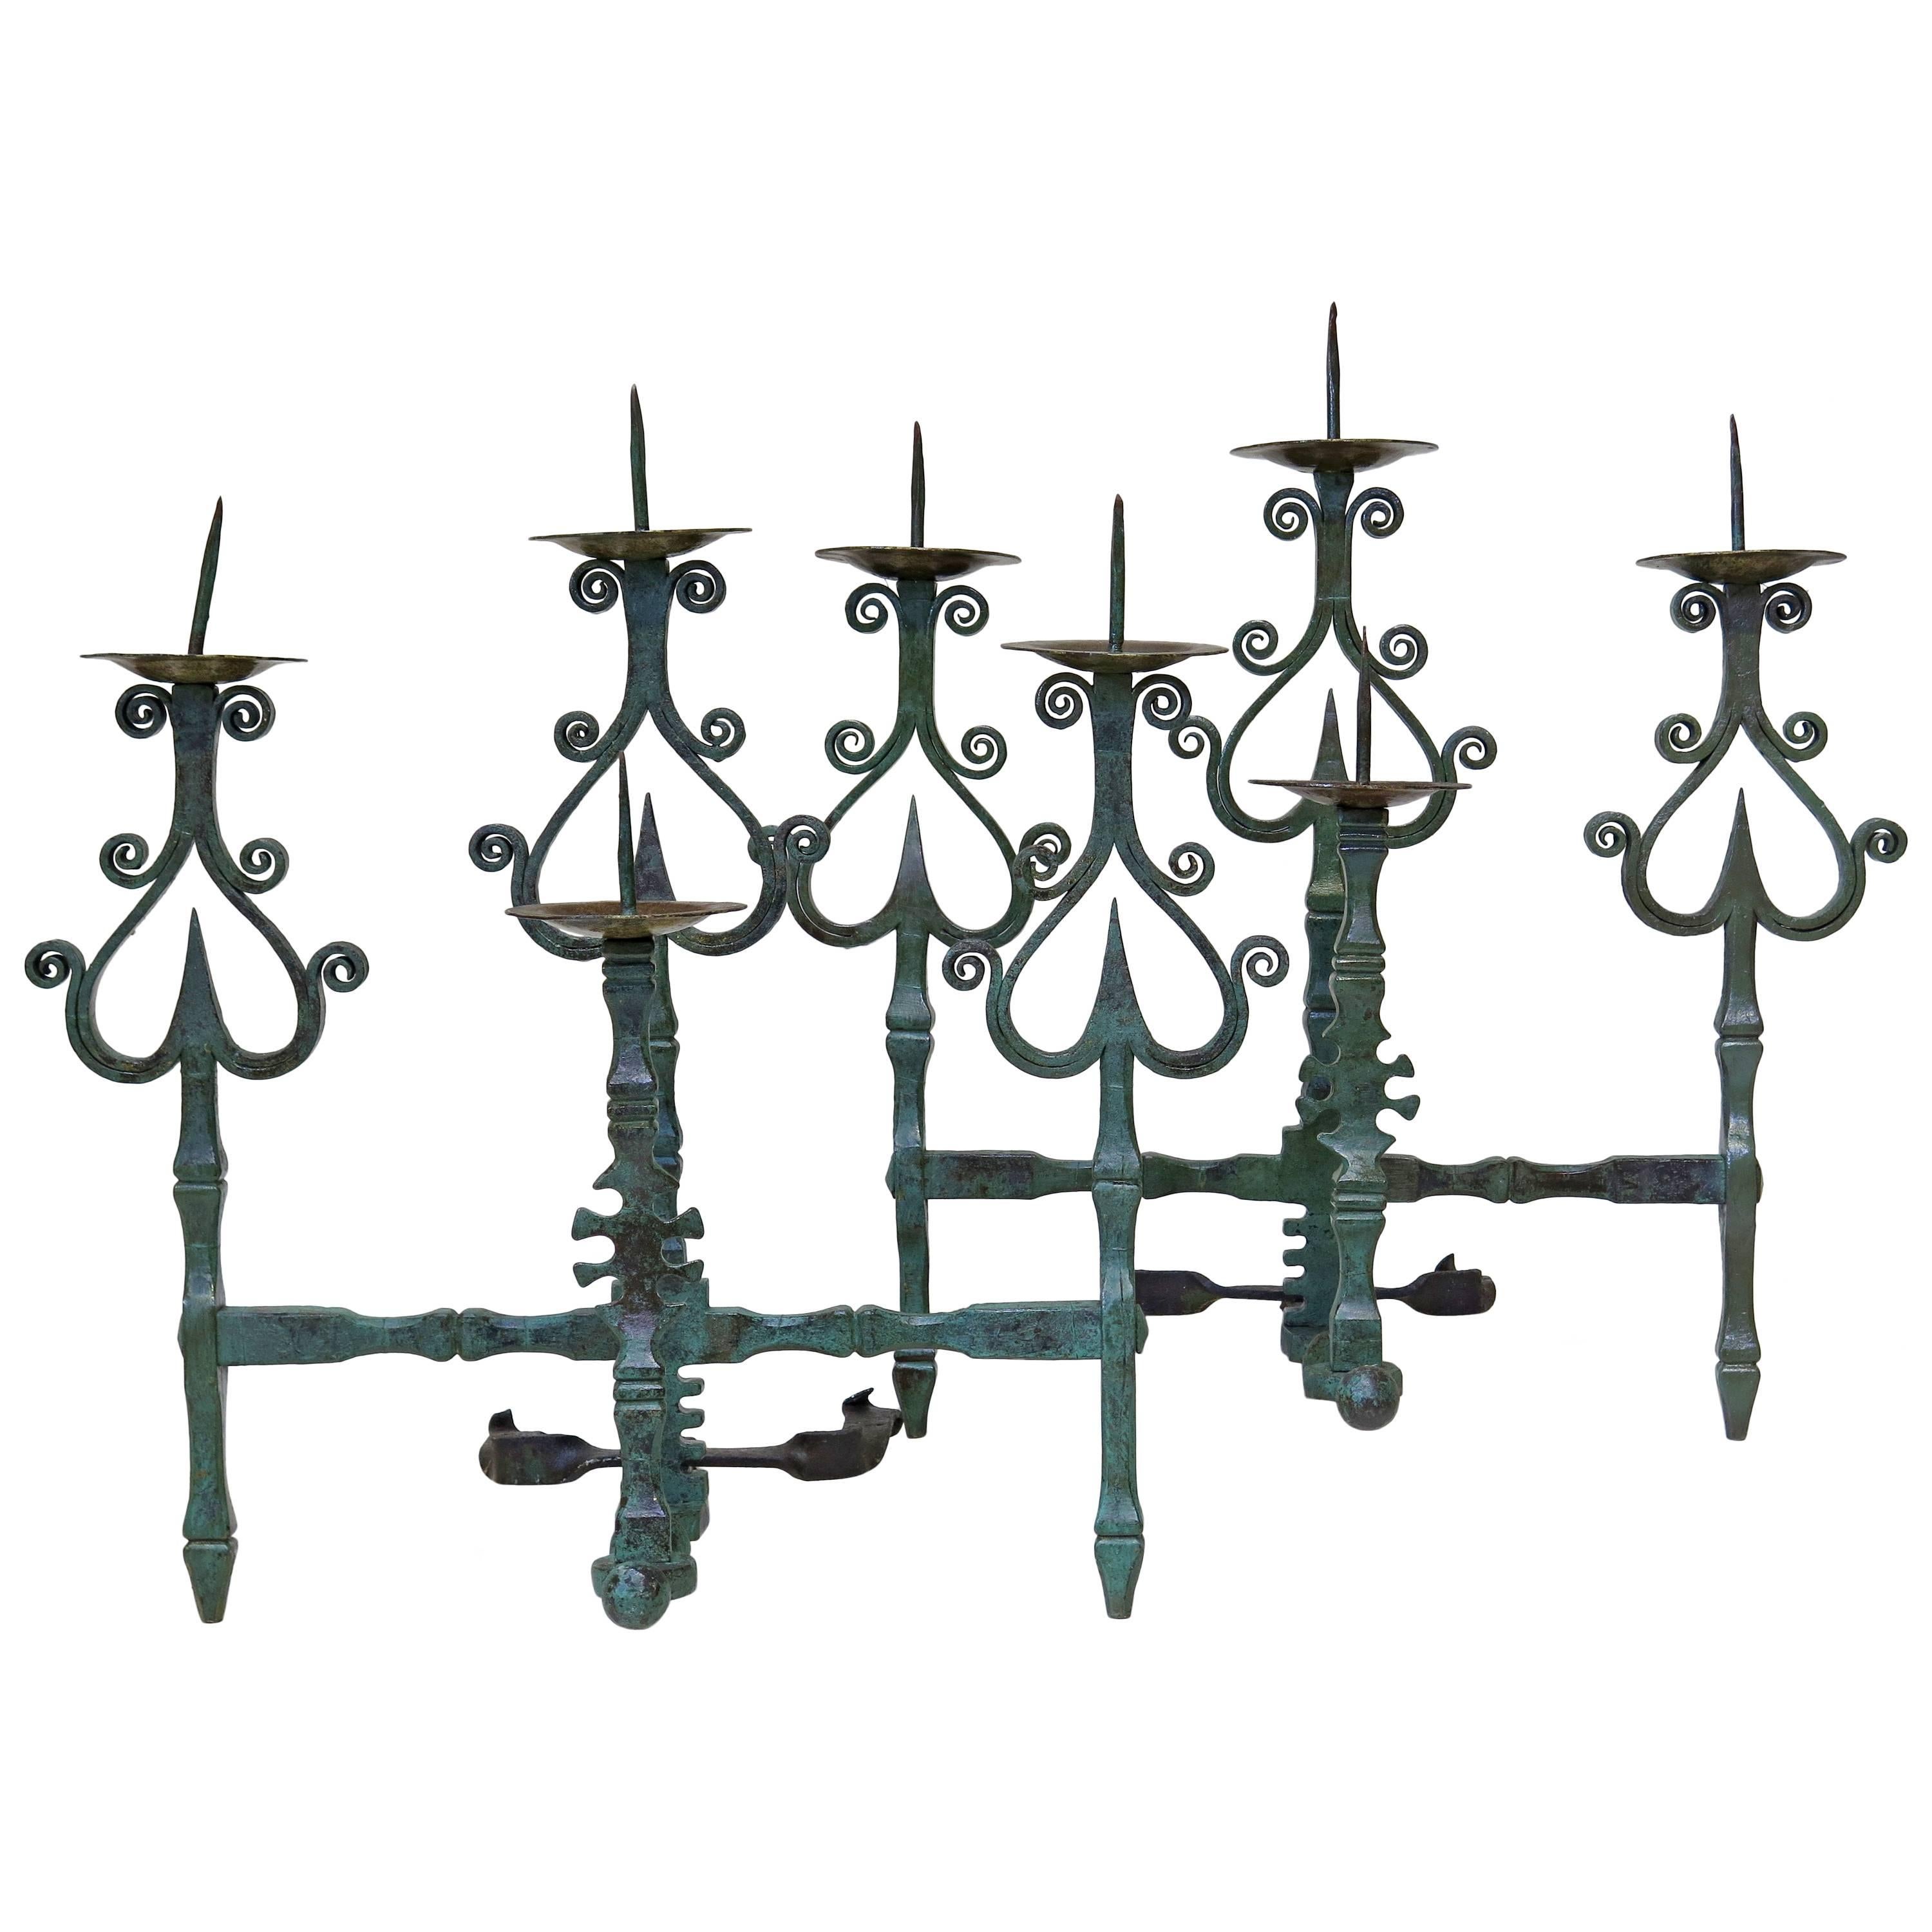 Fabulous Pair of Large Wrought-Iron Sconces, France, Late 1800s